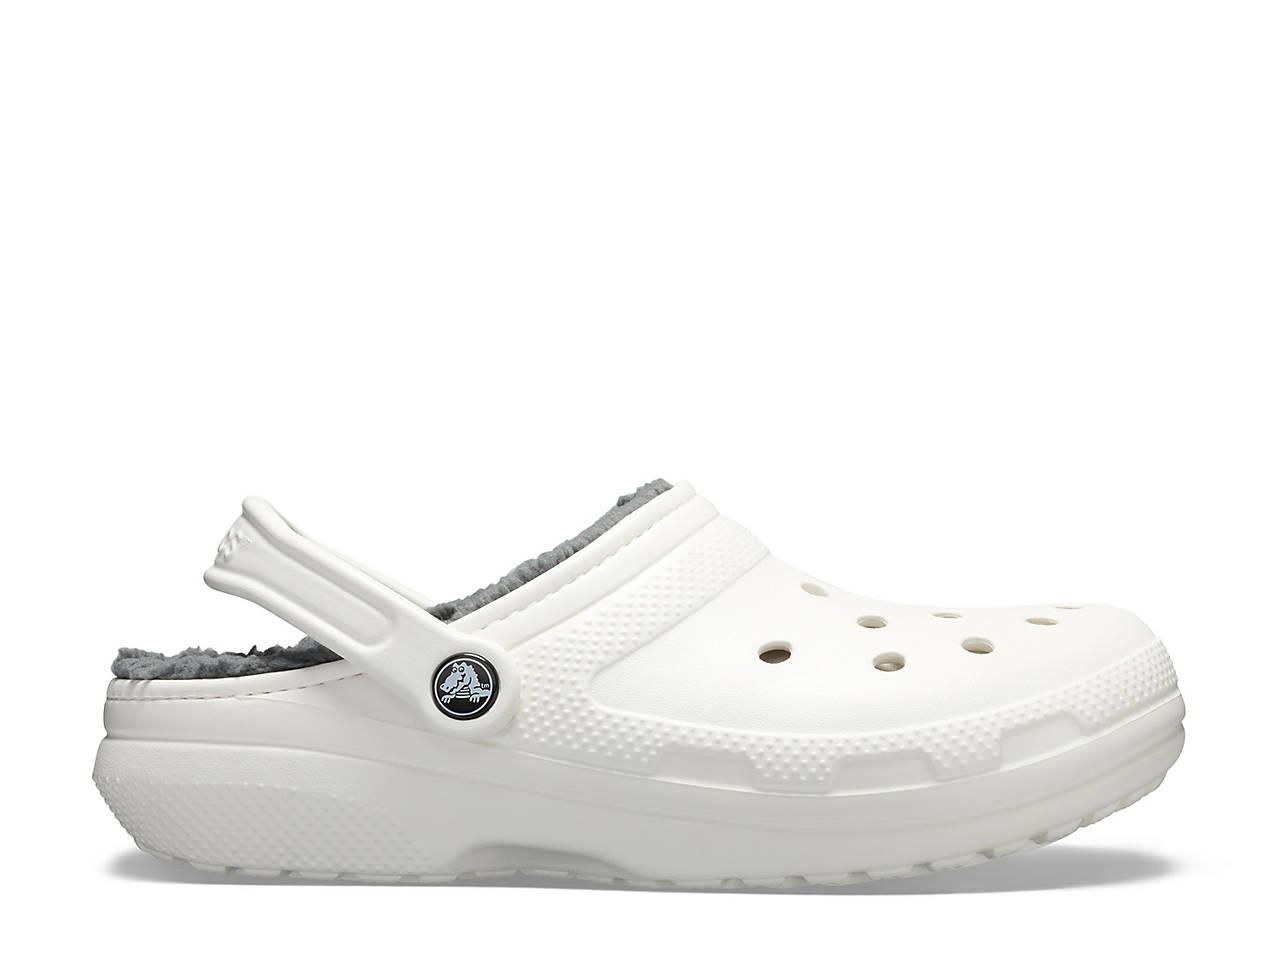 Crocs™ Classic Lined Clogs in White/Grey (White) for Men - Save 2% - Lyst